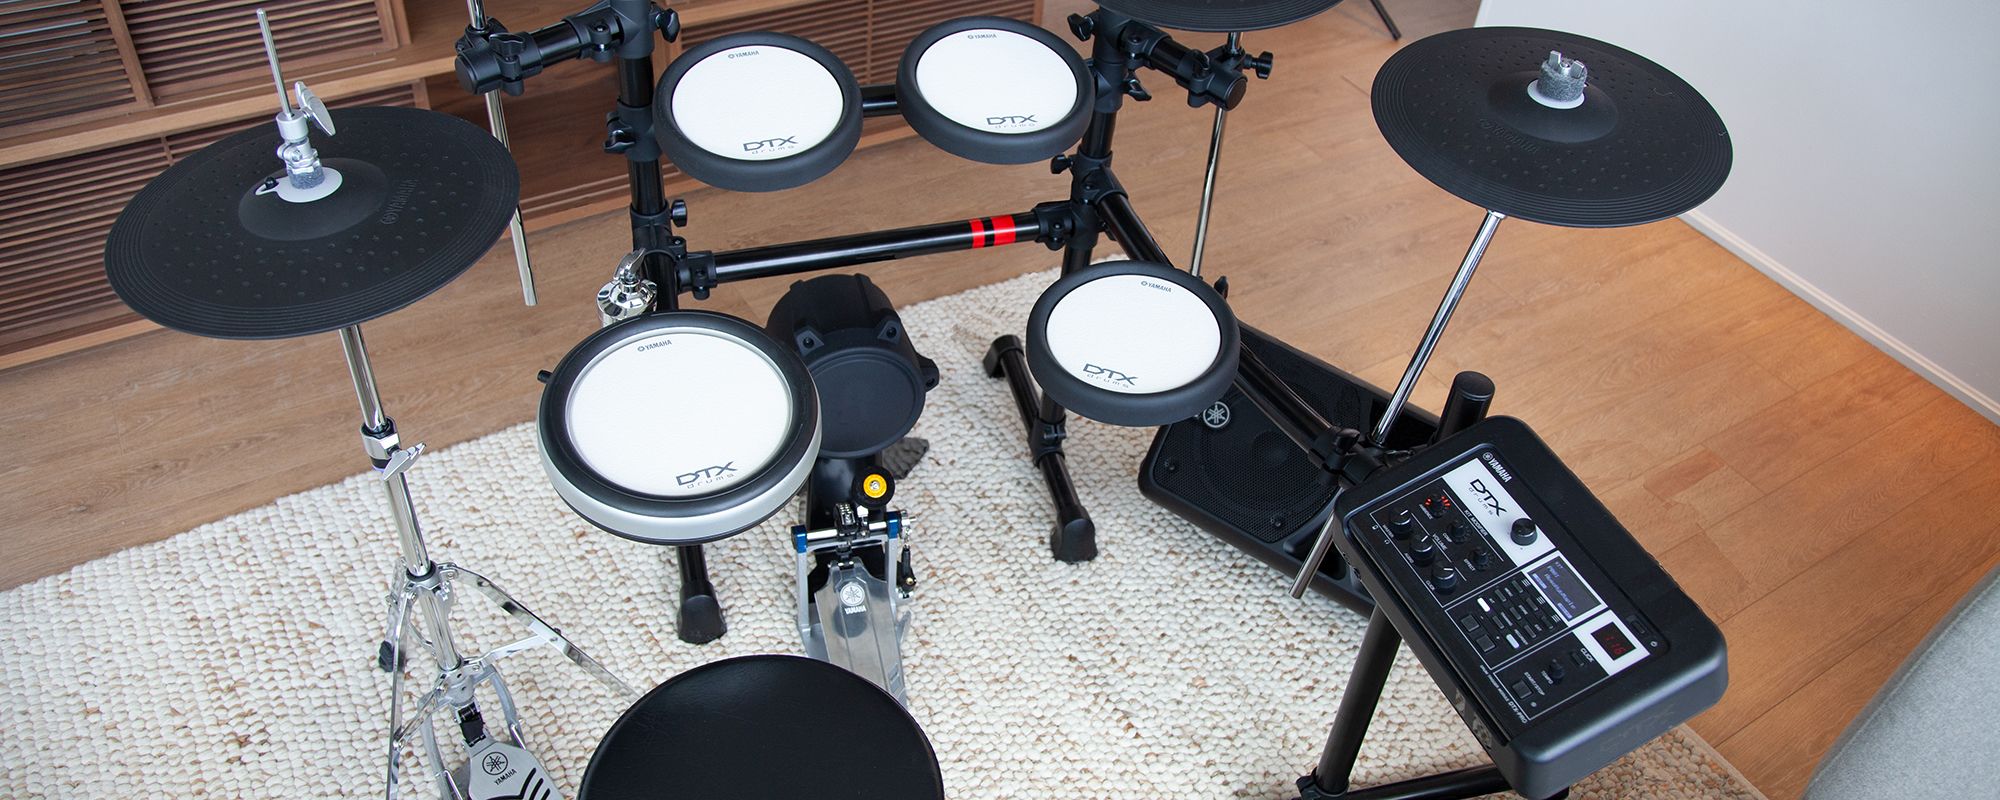 DTX Electronic Drums, Modules, and Hardware - Yamaha USA